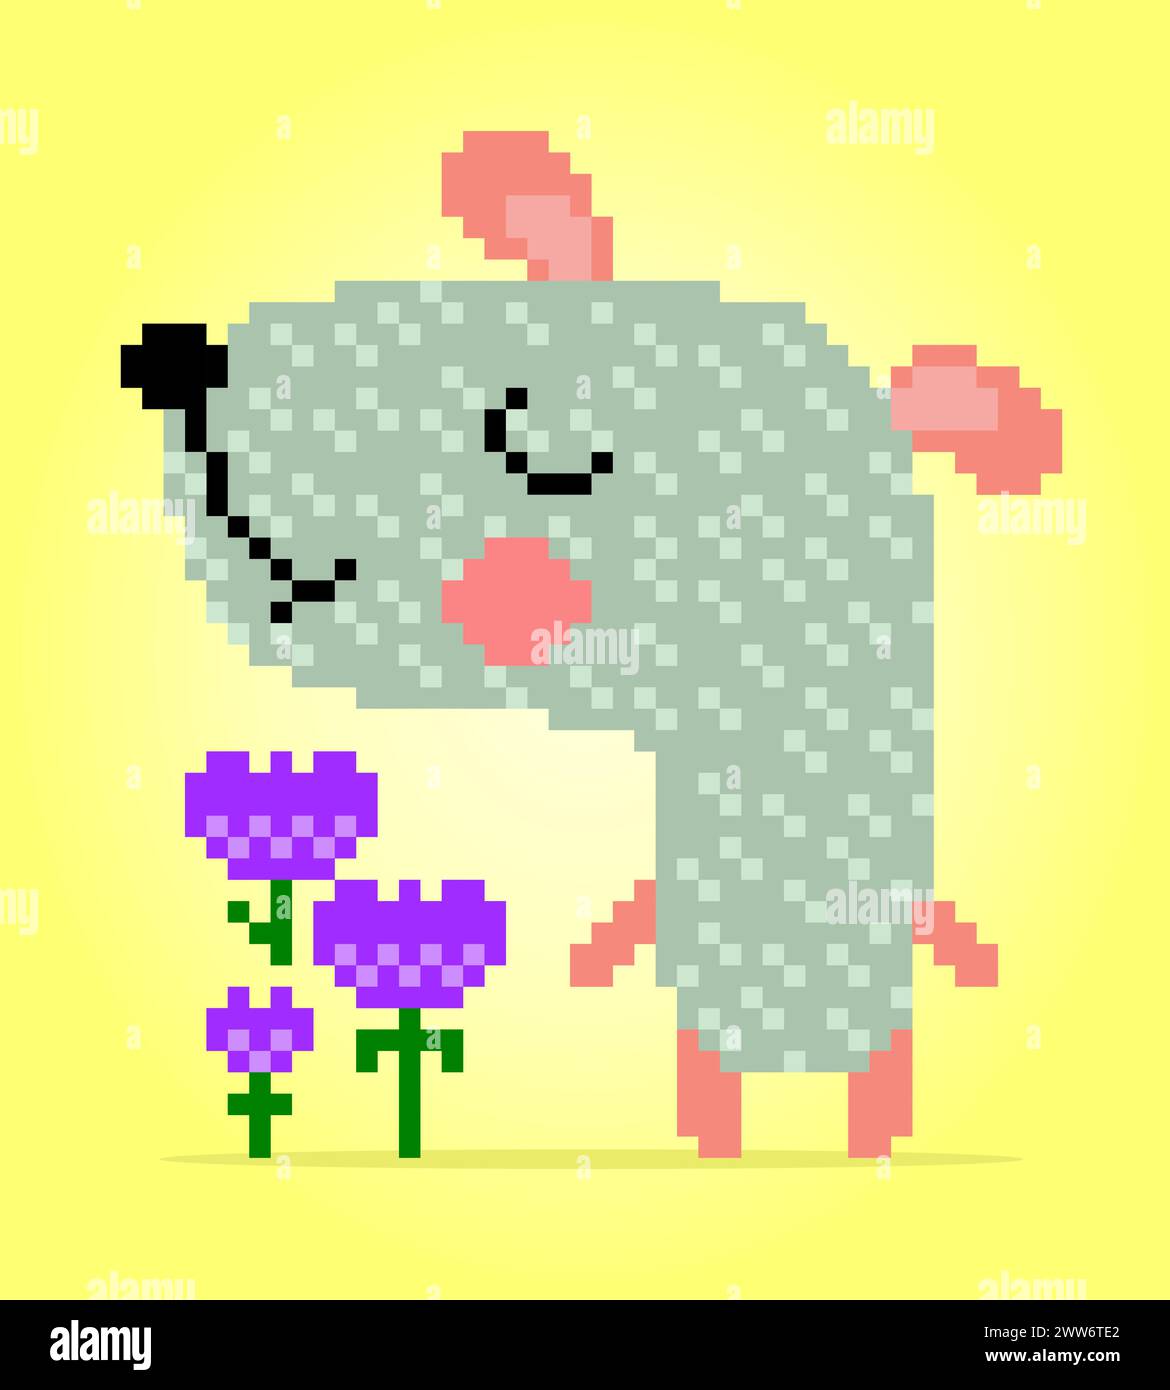 8 bit pixels puppy. Animals for game assets and cross stitch patterns in vector illustrations. Stock Vector